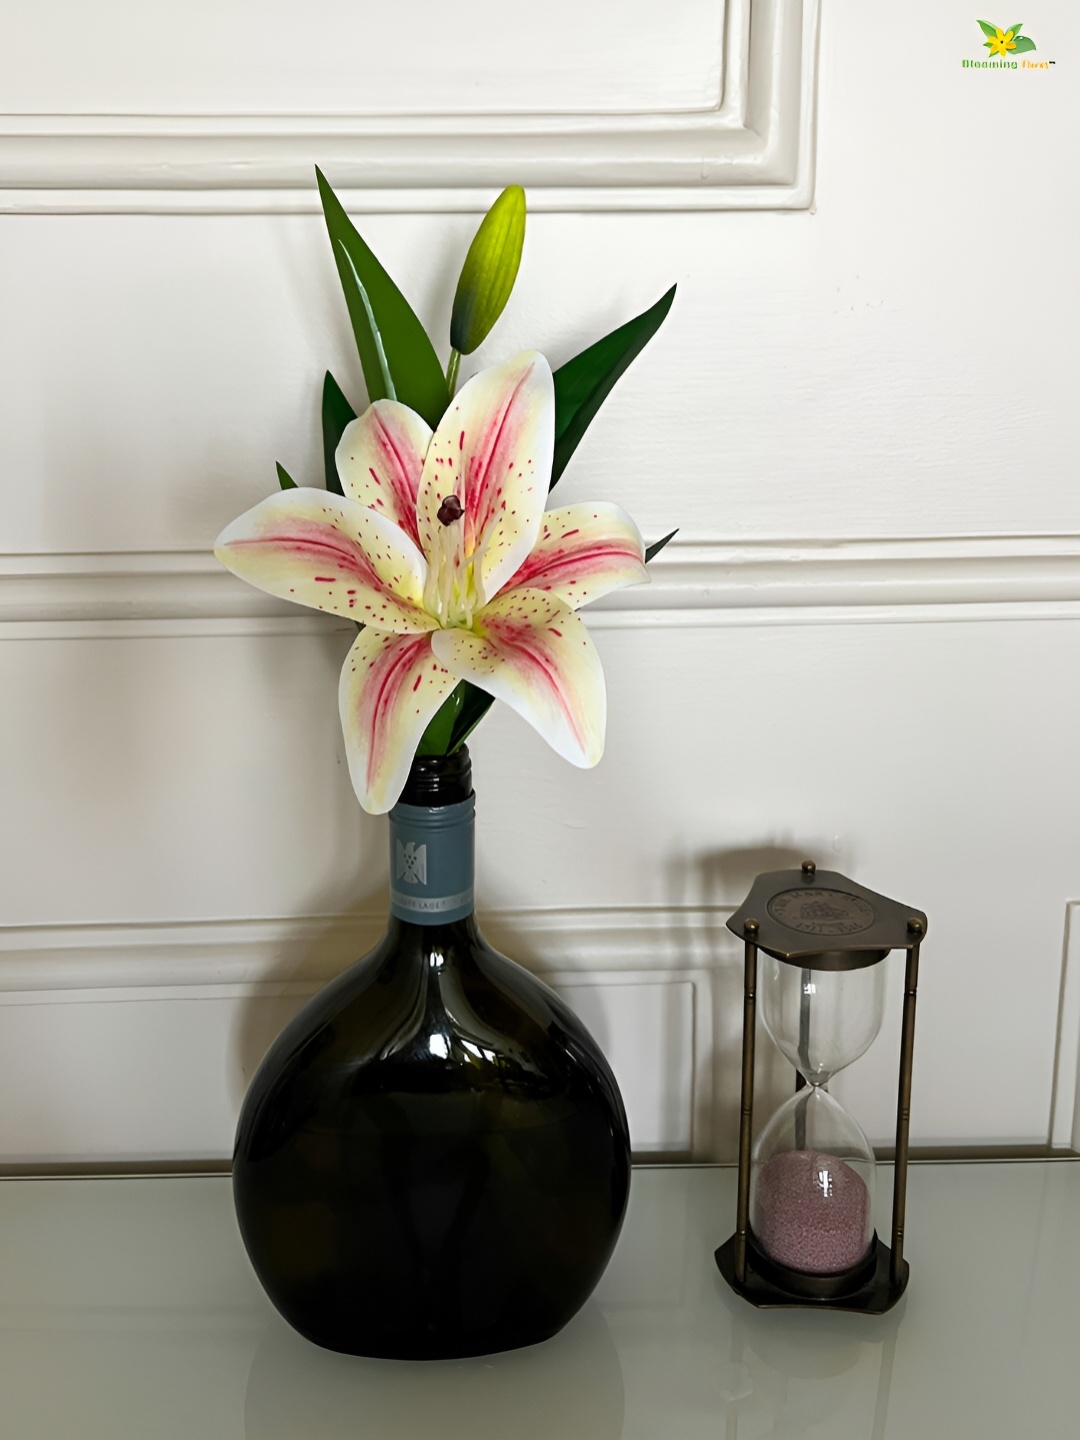 

Blooming Floret White Lily Artificial Flower